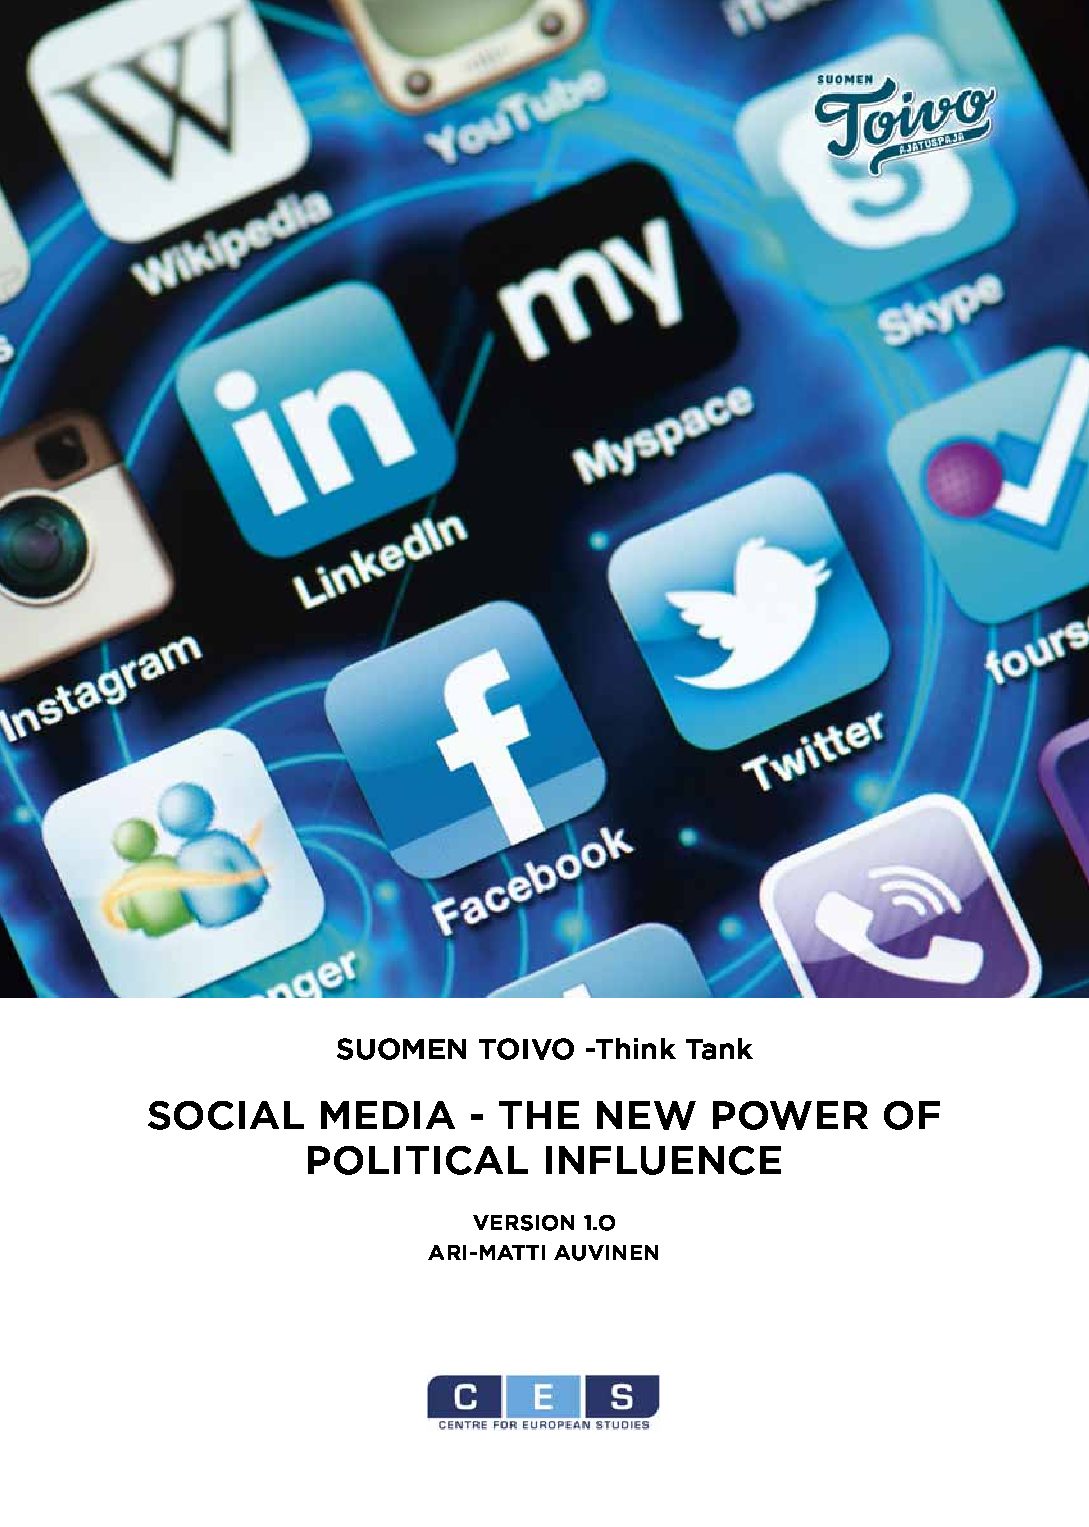 social media influence on political views research paper